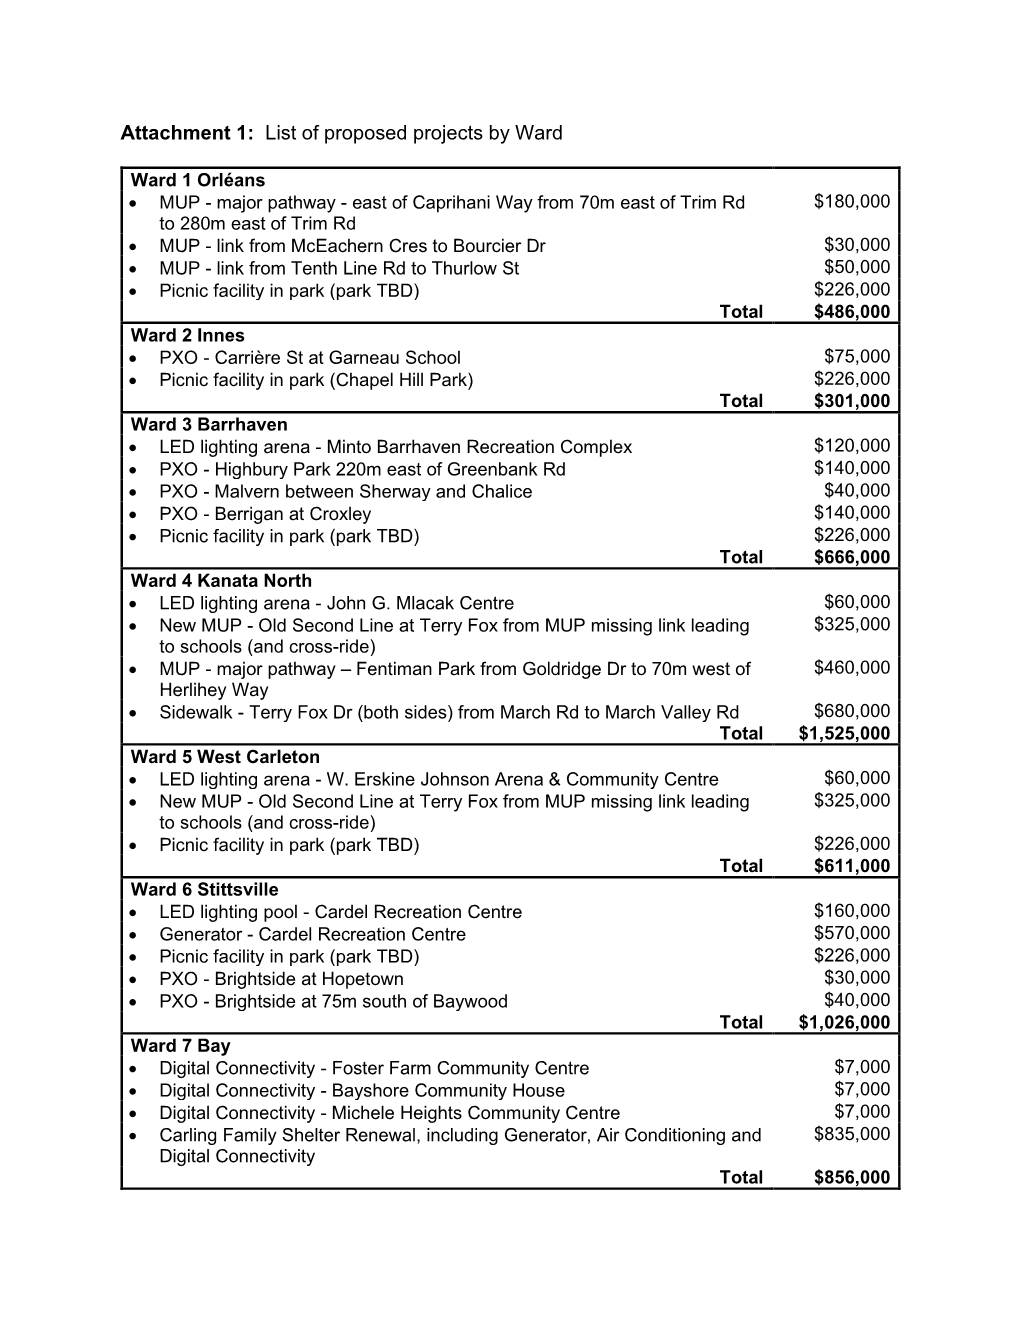 List of Proposed Projects by Ward